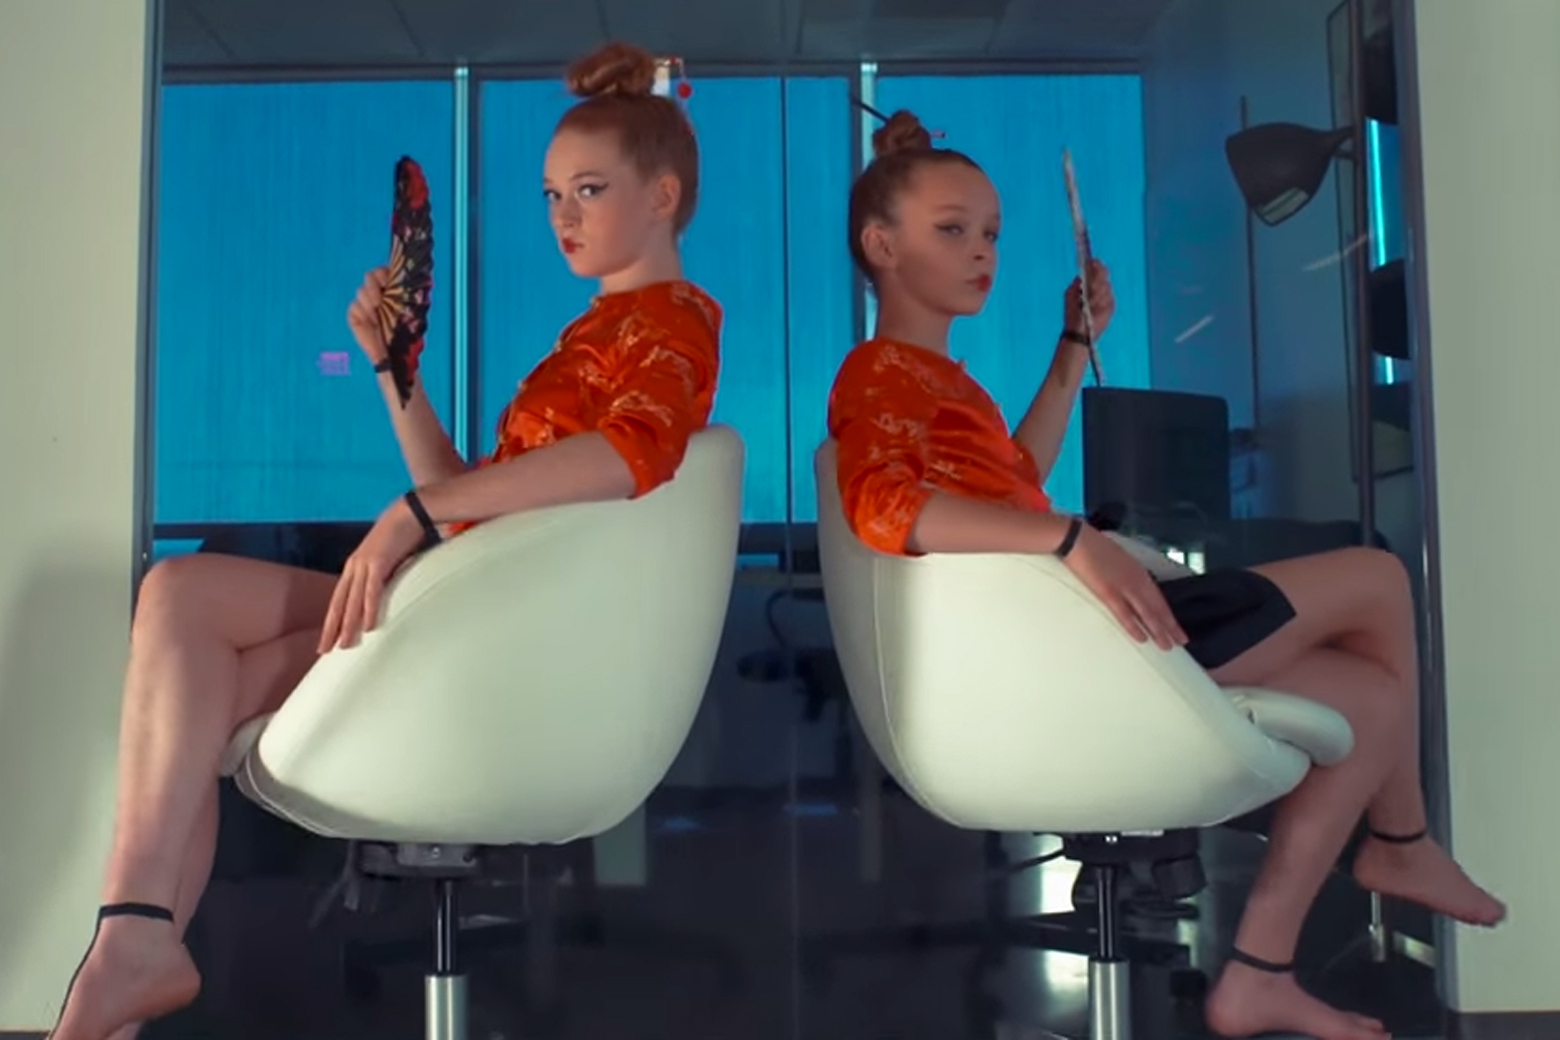 Two teens spoof Beyonce’s ‘Who Run the World’ video